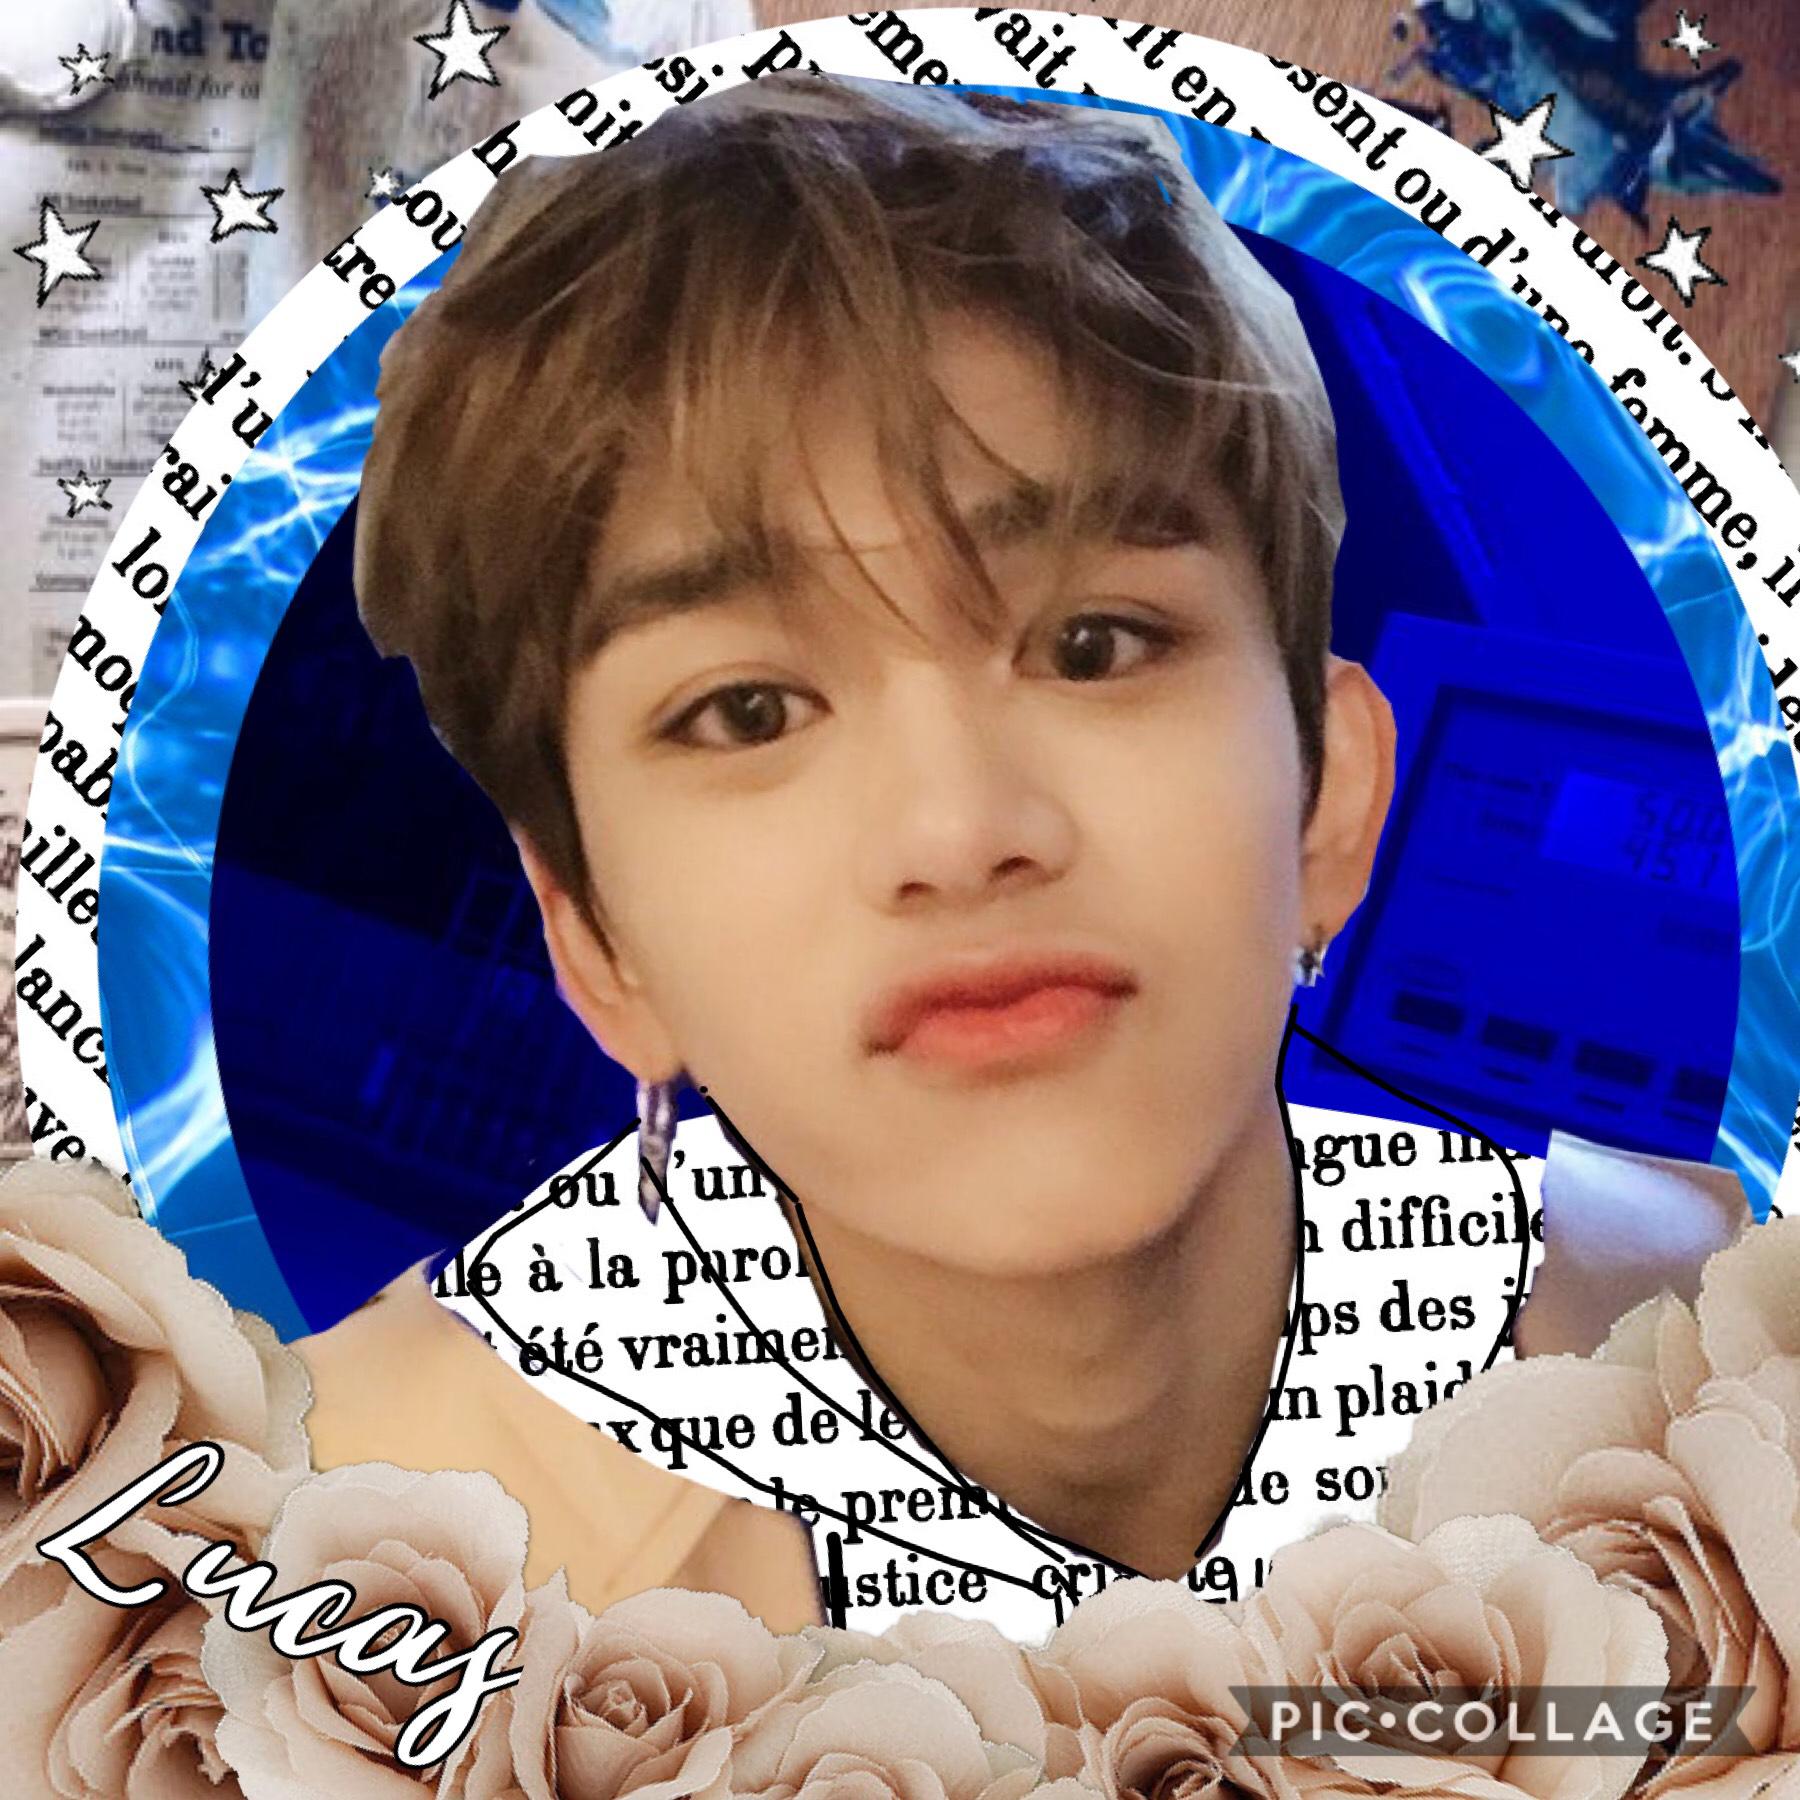 happy lucas day💙 (tap✨)
Happy Birthday Wong Yukhei <33 This.. CRACKHEAD is 20 now! They grow too fast ;-; 
Btw, sorry for beşng inactive, I’ll try to be active more often <3 Also, to all the people born in January, even if this is a little late, HAPPY BIR